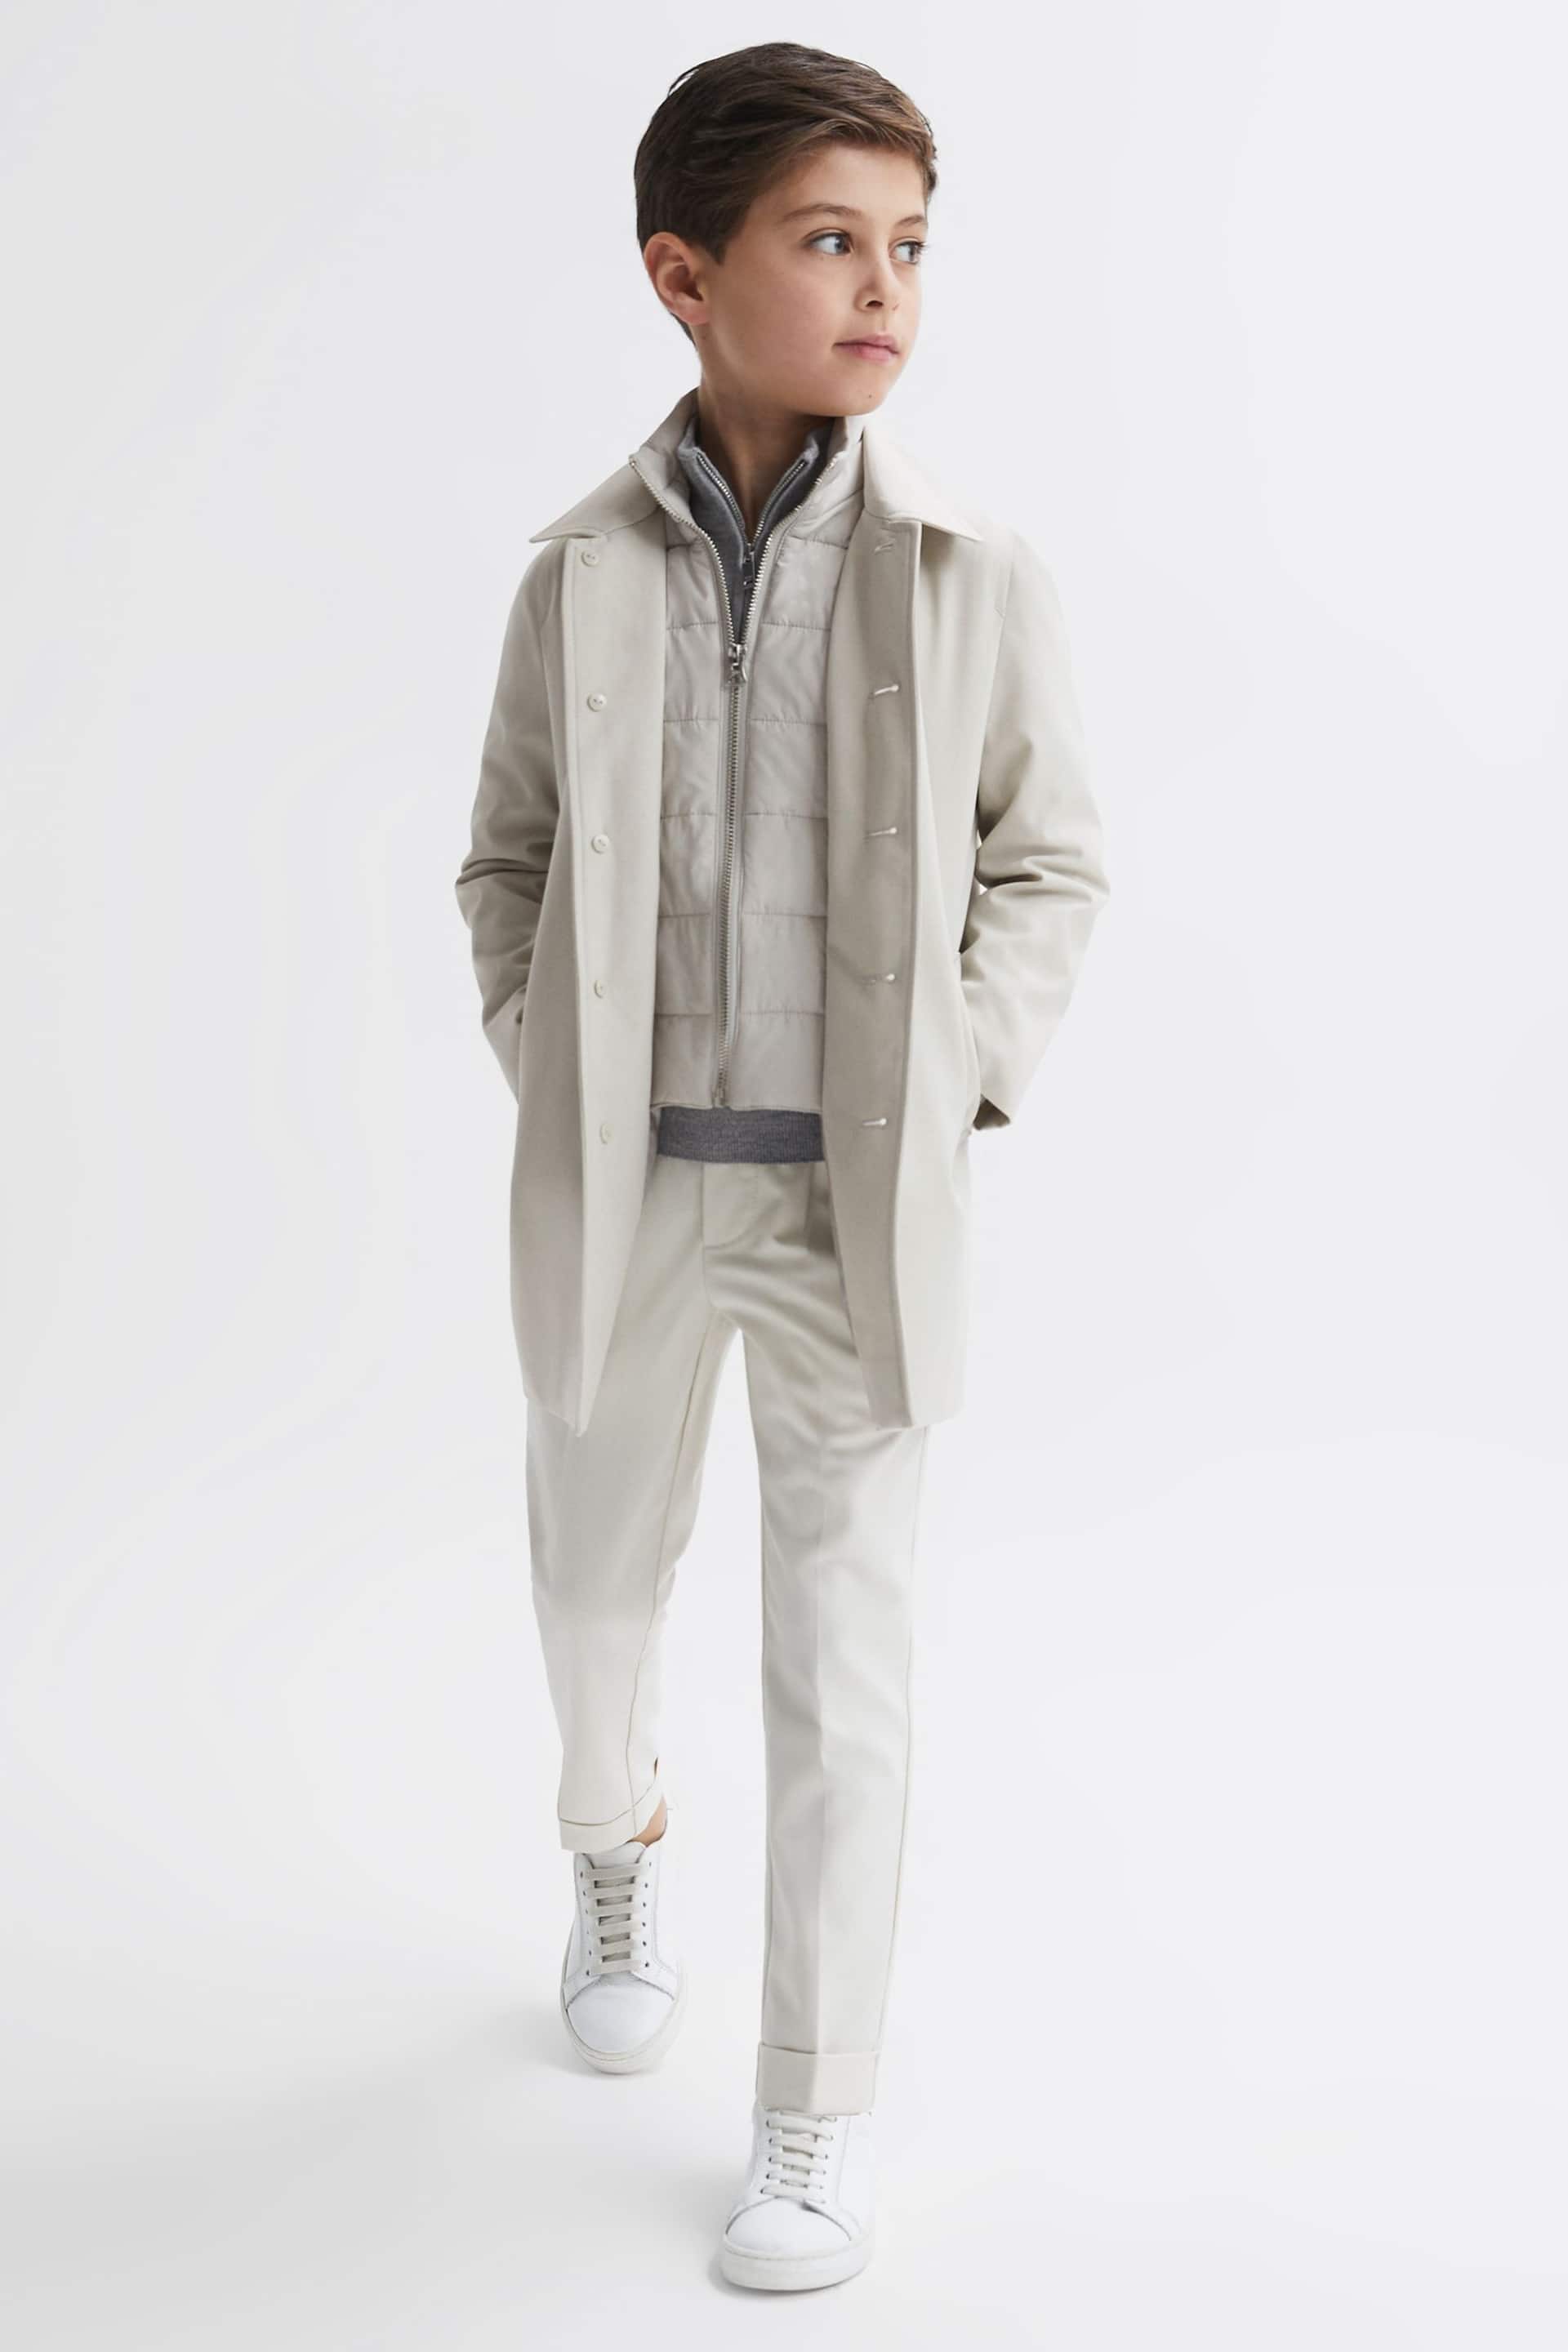 Reiss Stone Perrin Senior Trench With Funnel-Neck Insert - Image 3 of 7